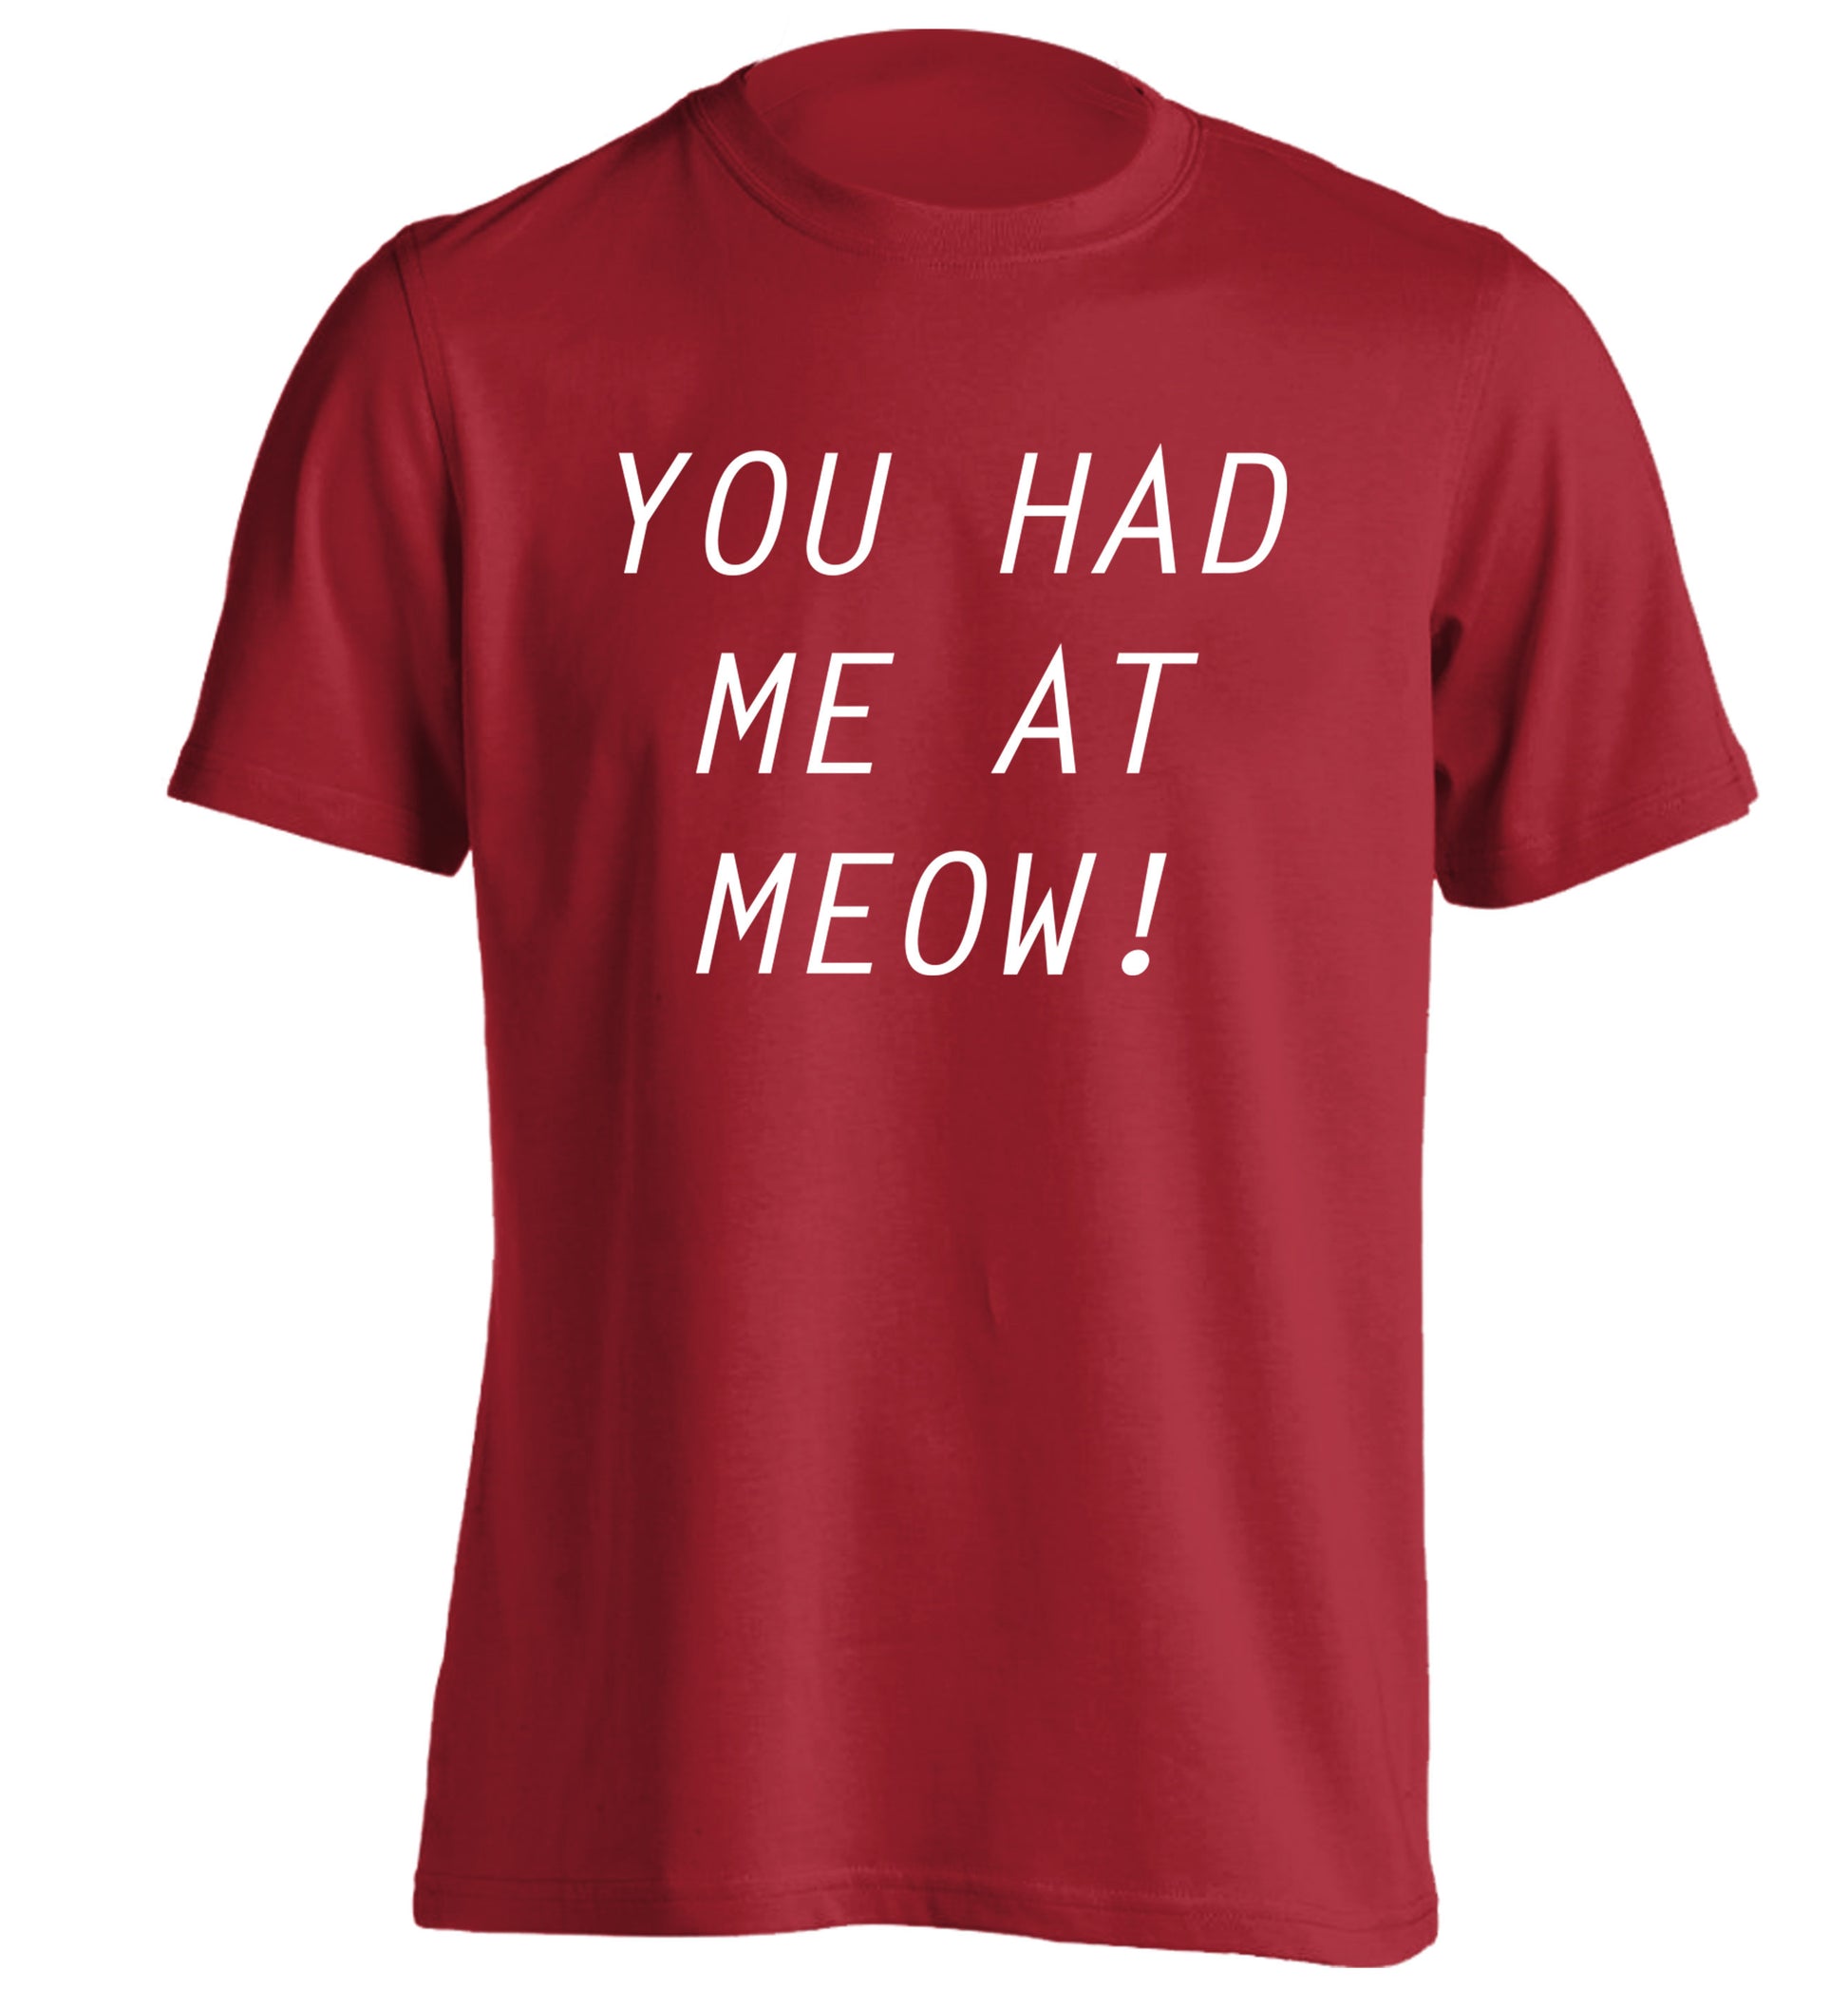 You had me at meow adults unisex red Tshirt 2XL